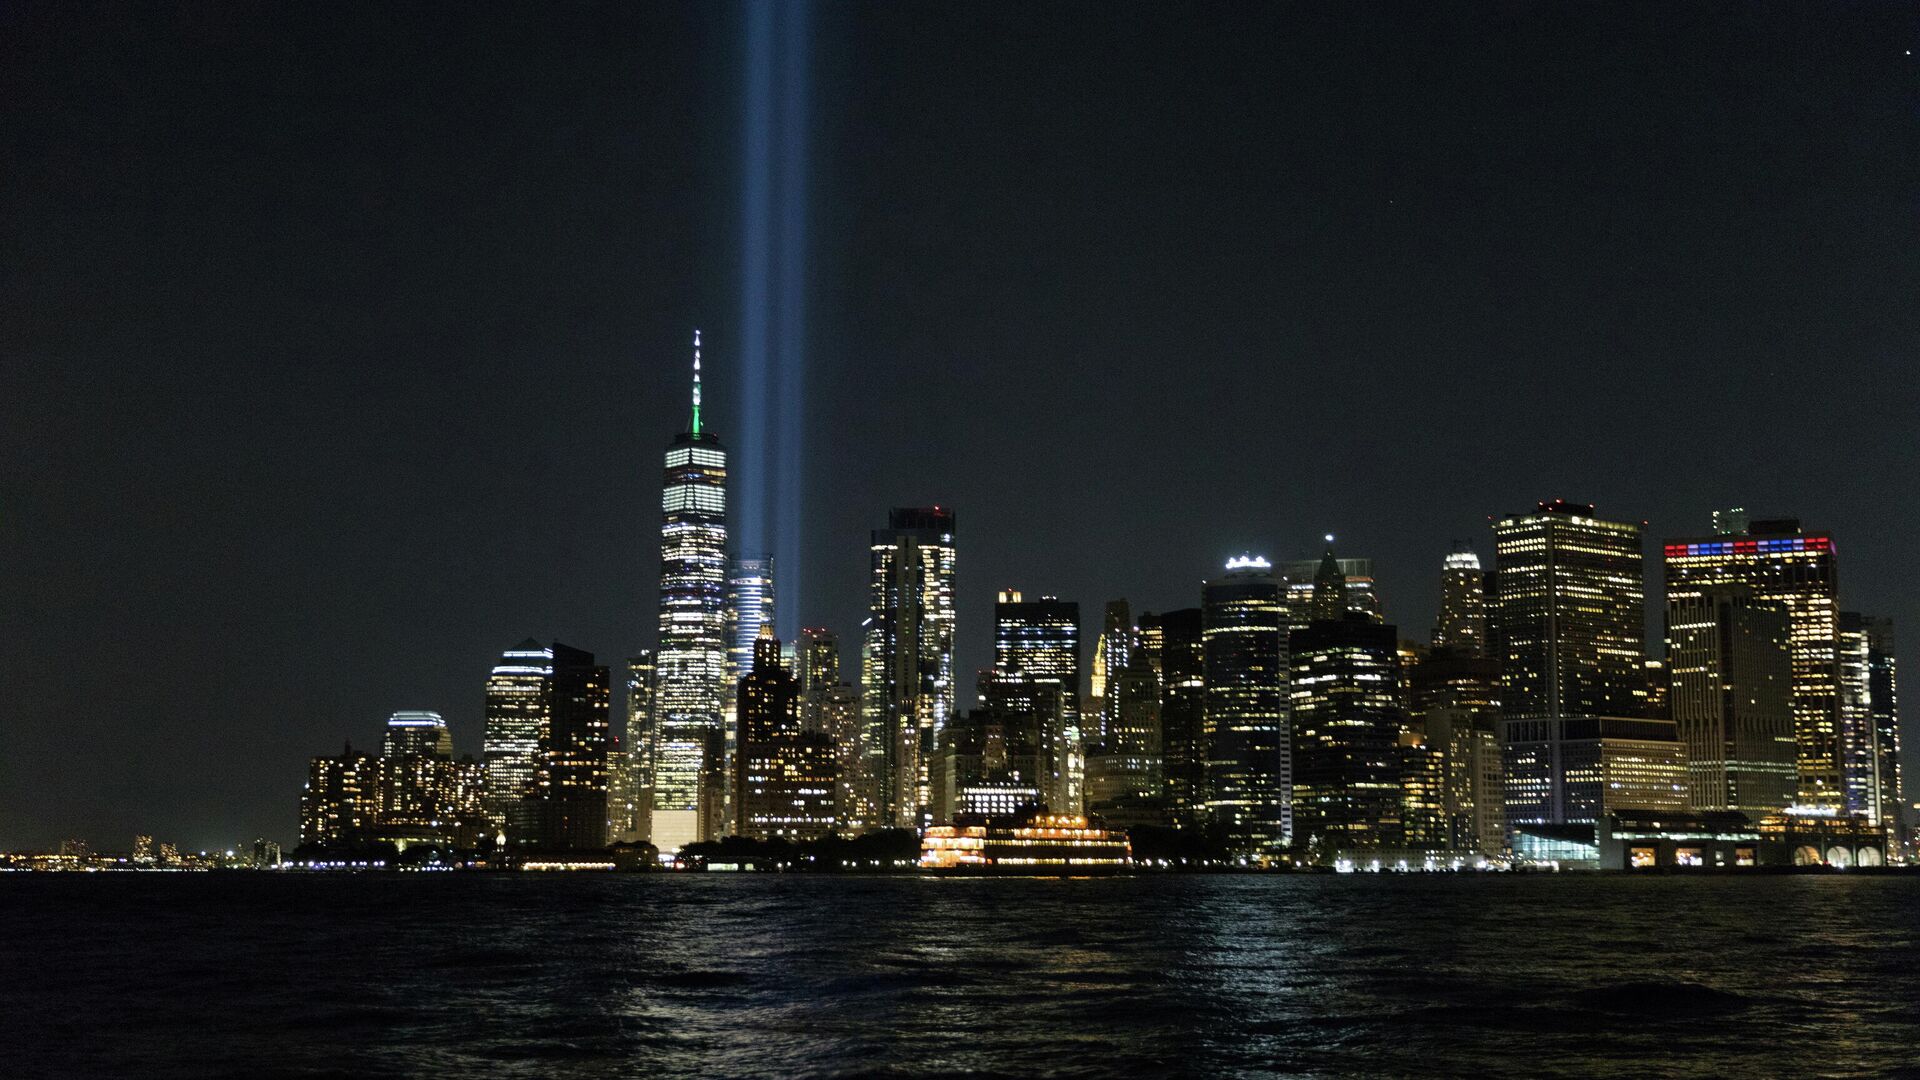 The tribute in lights is tested before the 20th anniversary of the September 11 attacks in New York City, New York, U.S., September 7, 2021 - Sputnik International, 1920, 10.09.2021